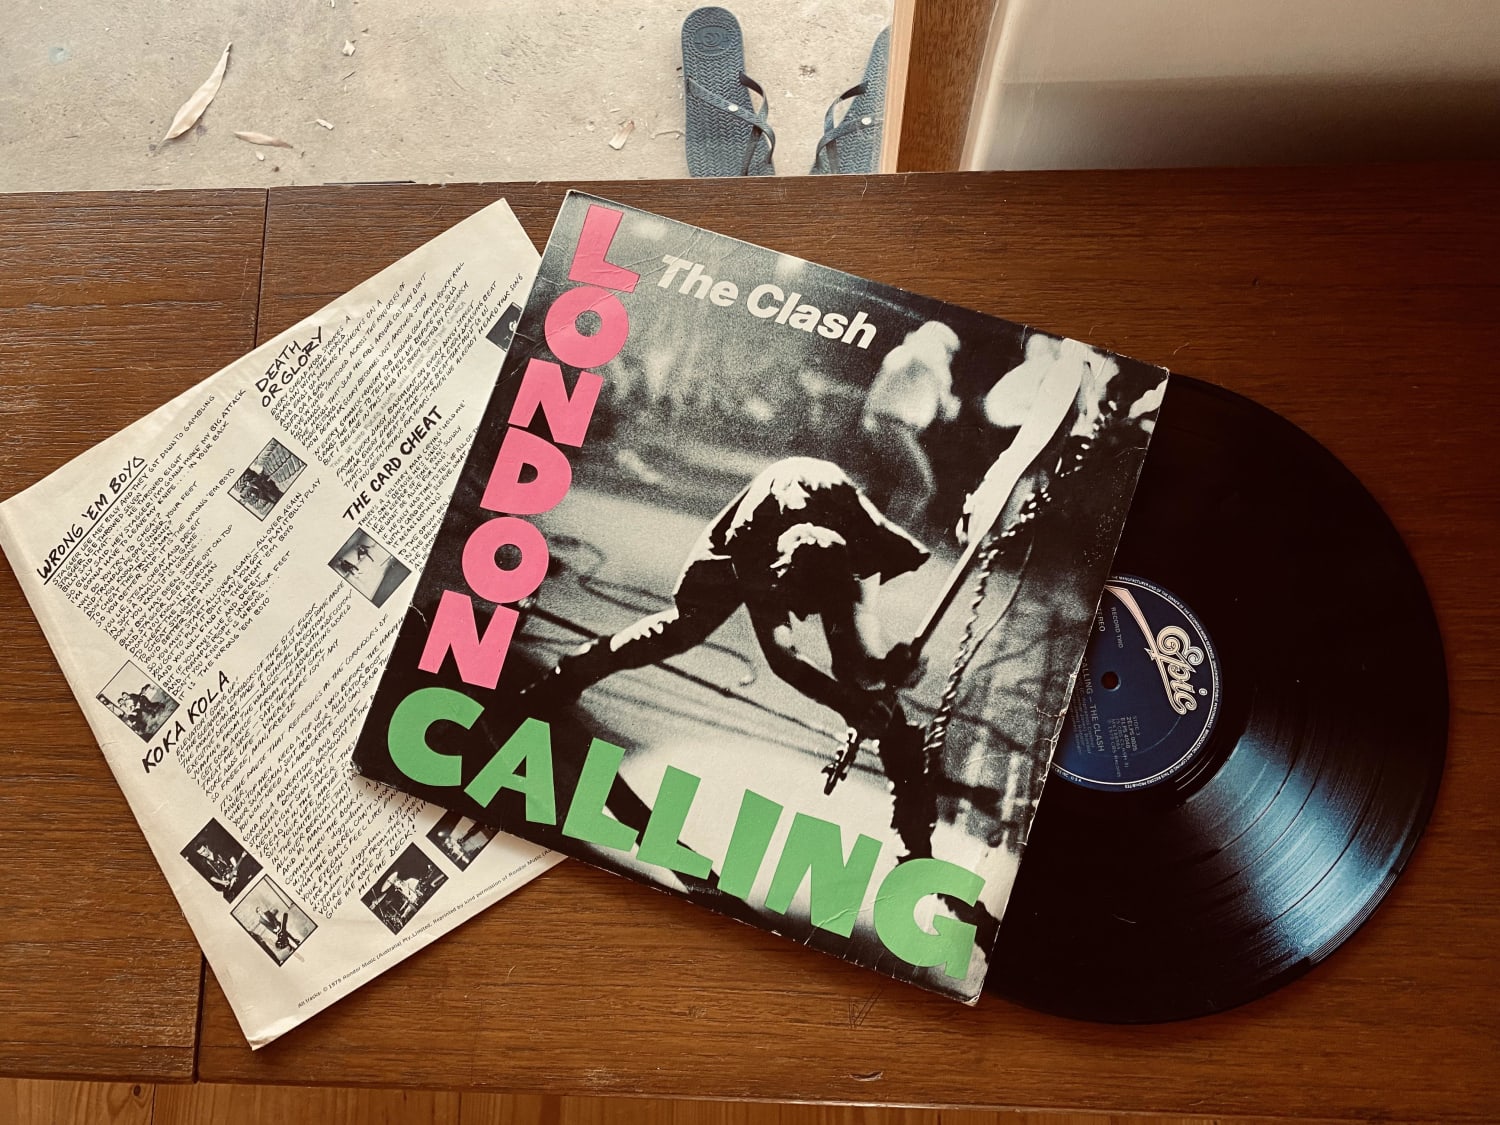 One of my most prized possessions, acquired (ahem) from my dad. Well, it’s his fault I love The Clash so it’s only fair.